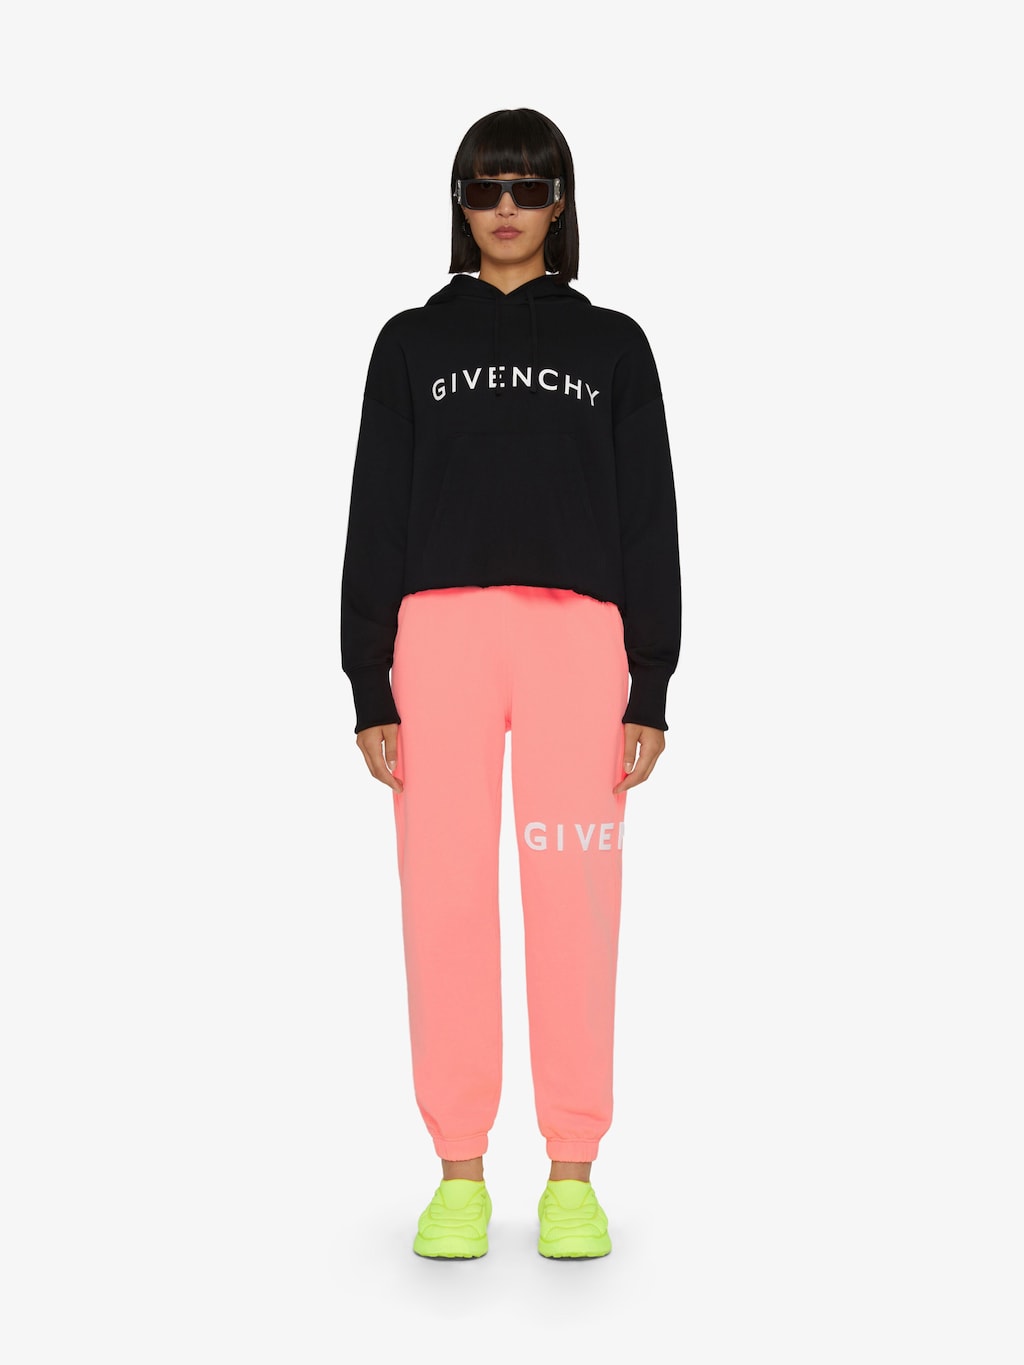 Designer Hoodies & Sweatshirts For Women | Givenchy US | GIVENCHY Paris